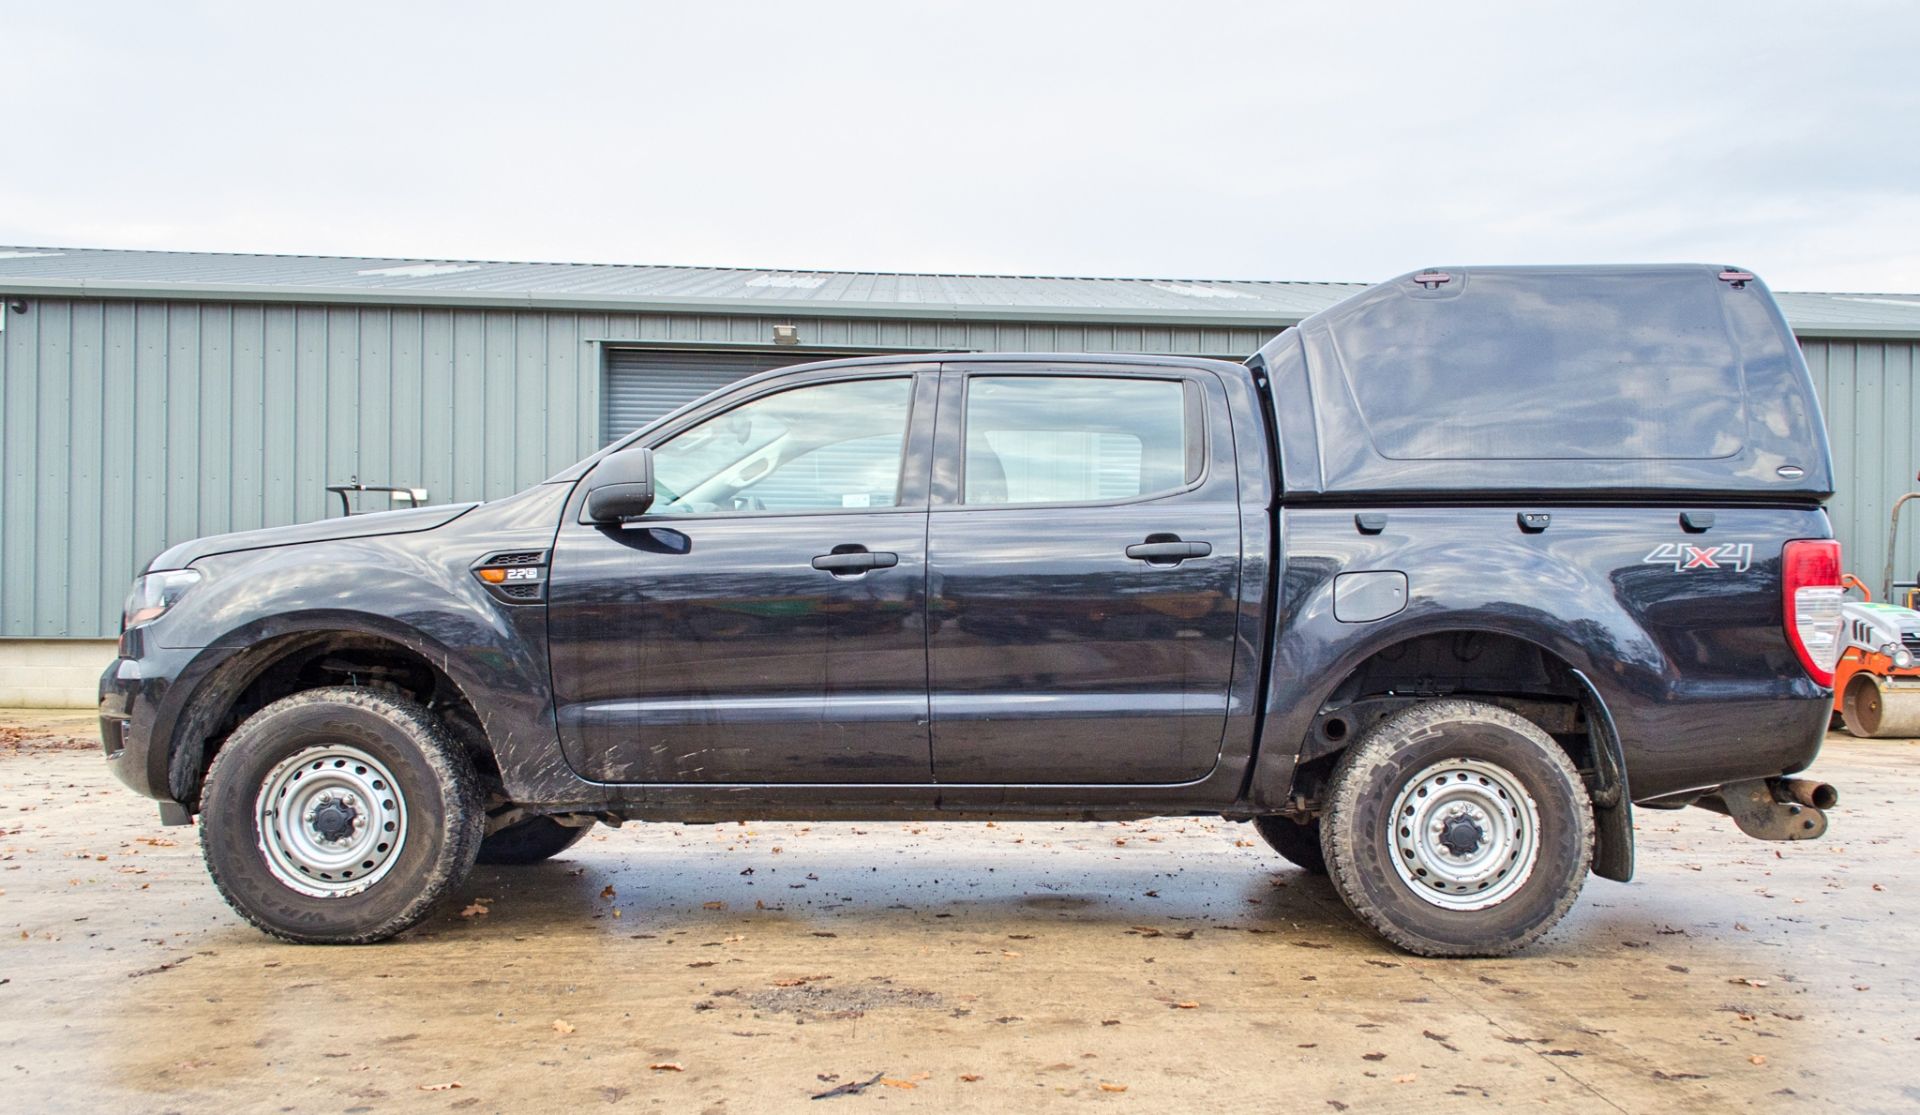 Ford Ranger 2.2 TDCI 160 XL double cab pick up (Ex MOD) VIN: 6FPPXXMJ2PHU42742 Date of Entry into - Image 7 of 32